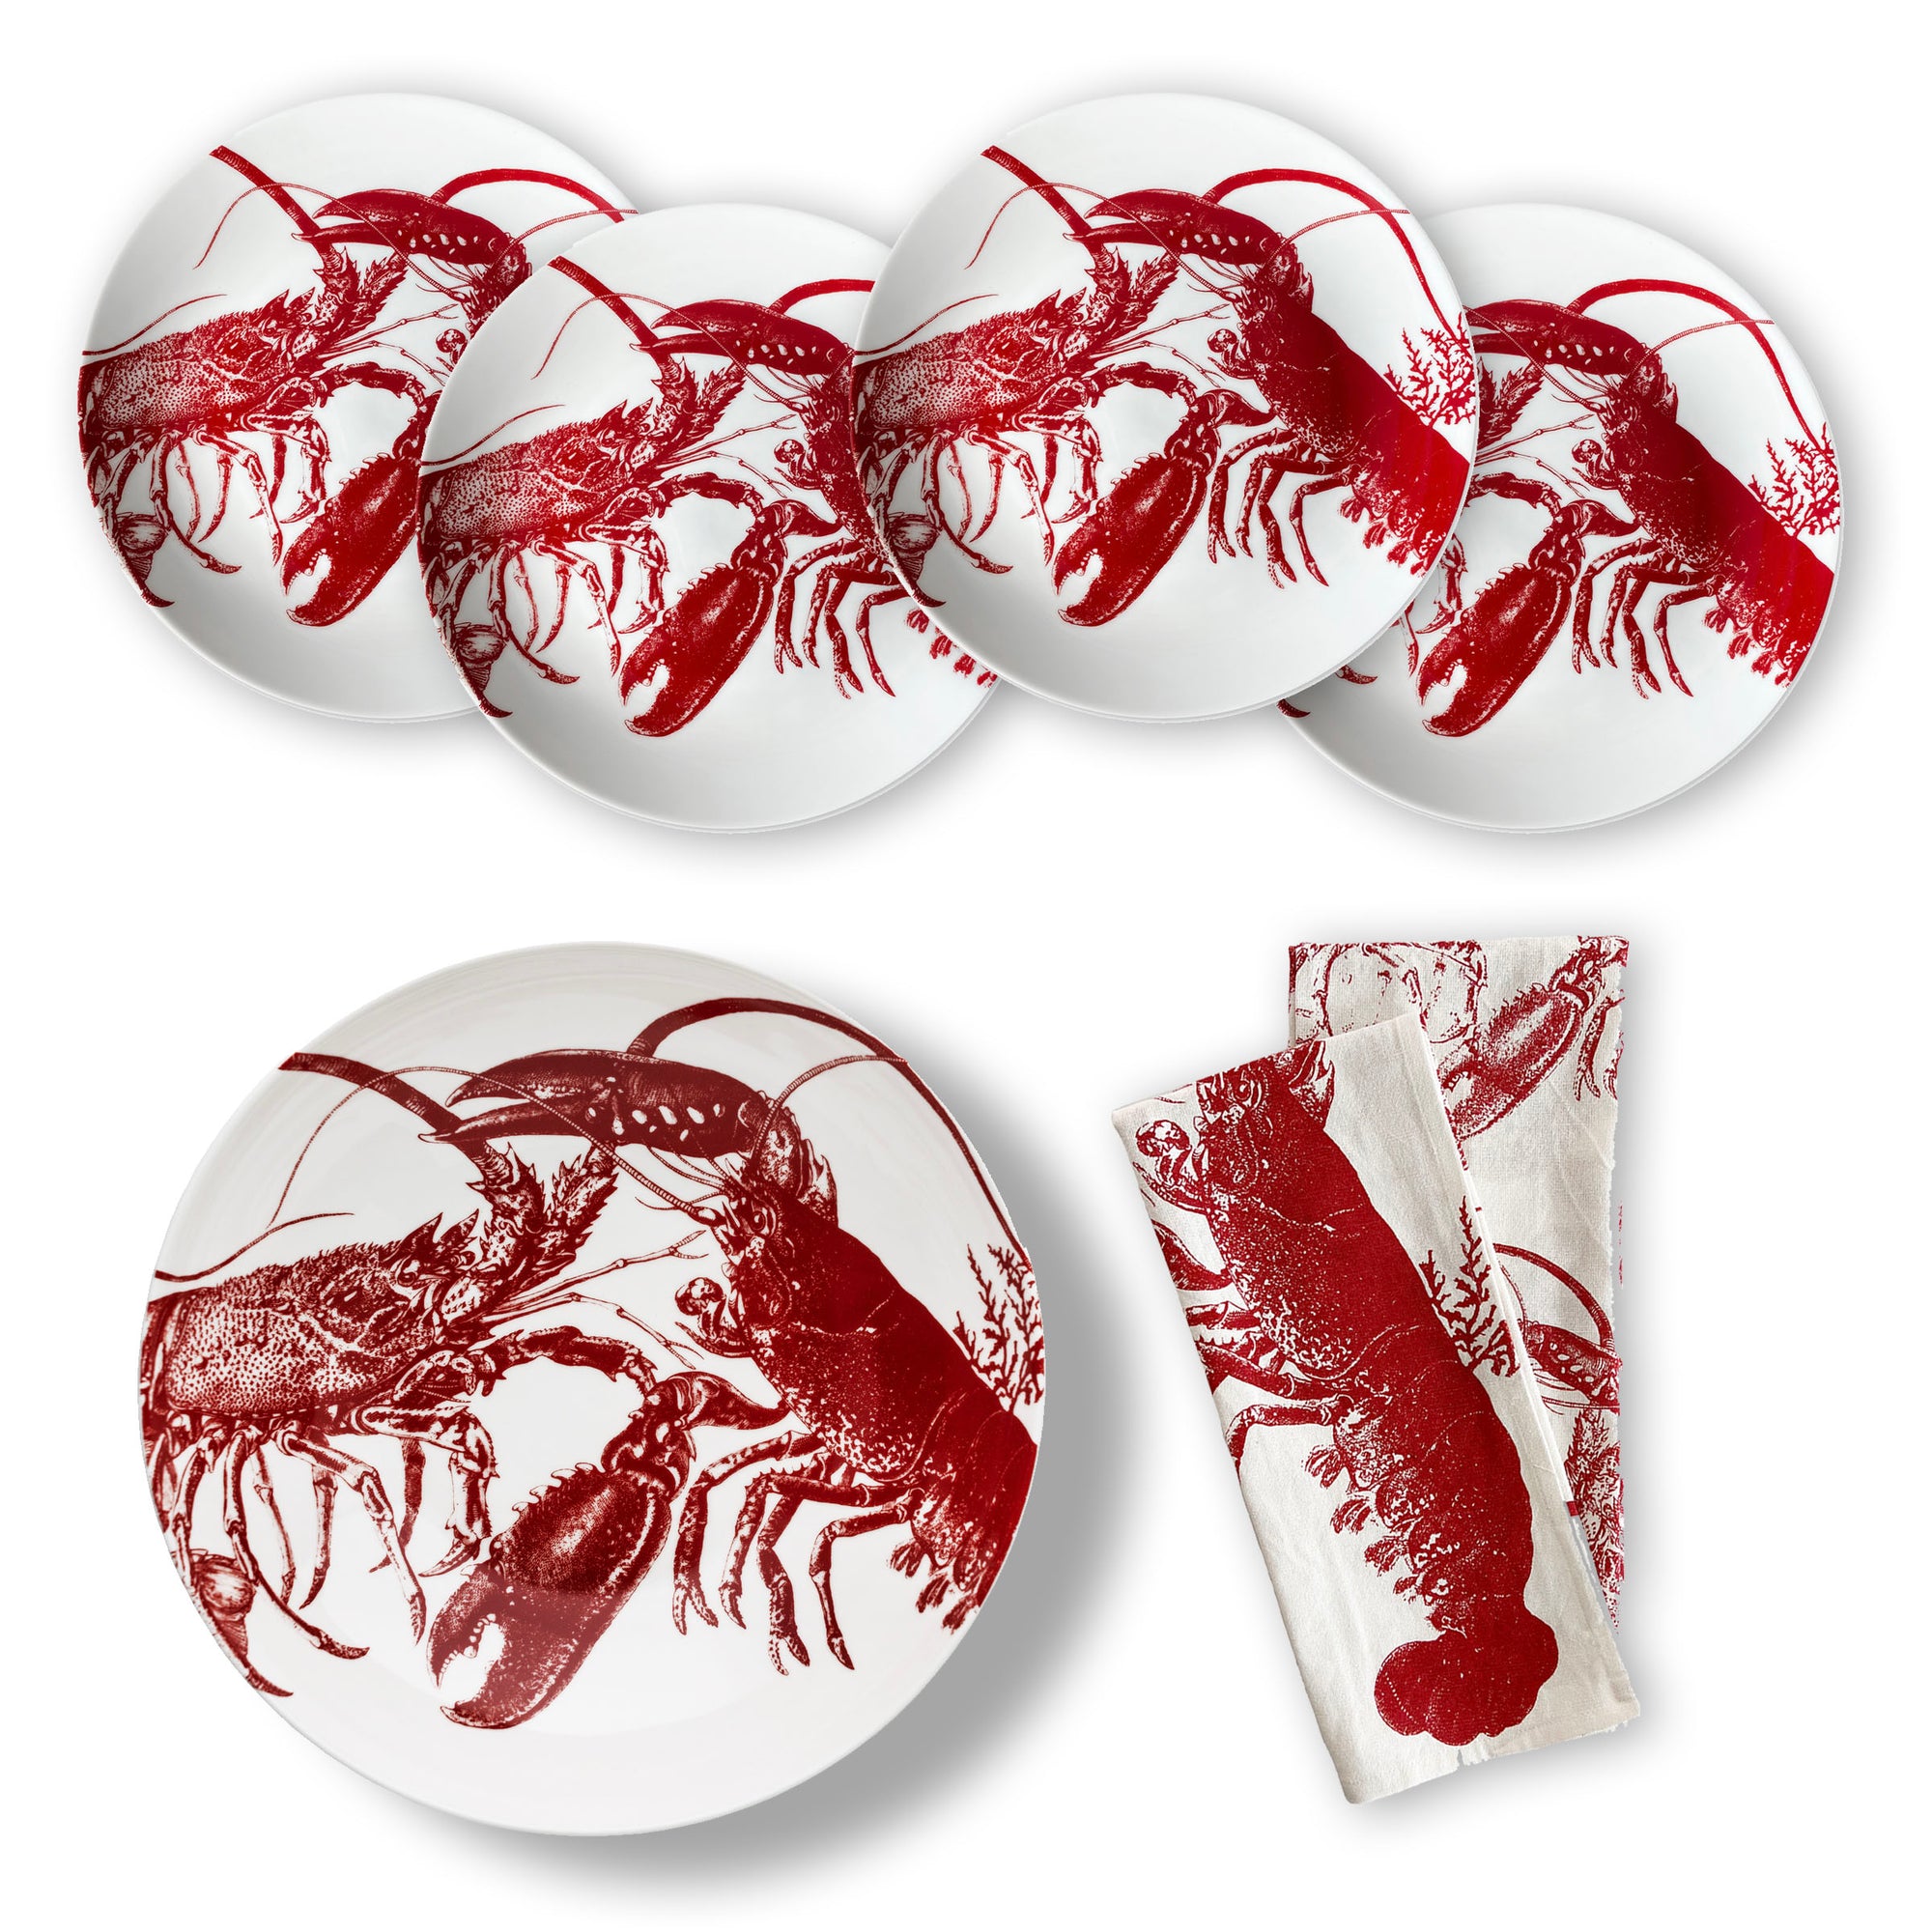 Caskata's July Fourth Bundle: Set of five white dinner plates and two white napkins, each adorned with a red lobster illustration. Complete your table setting with coordinating lobster kitchen towels for a cohesive look.